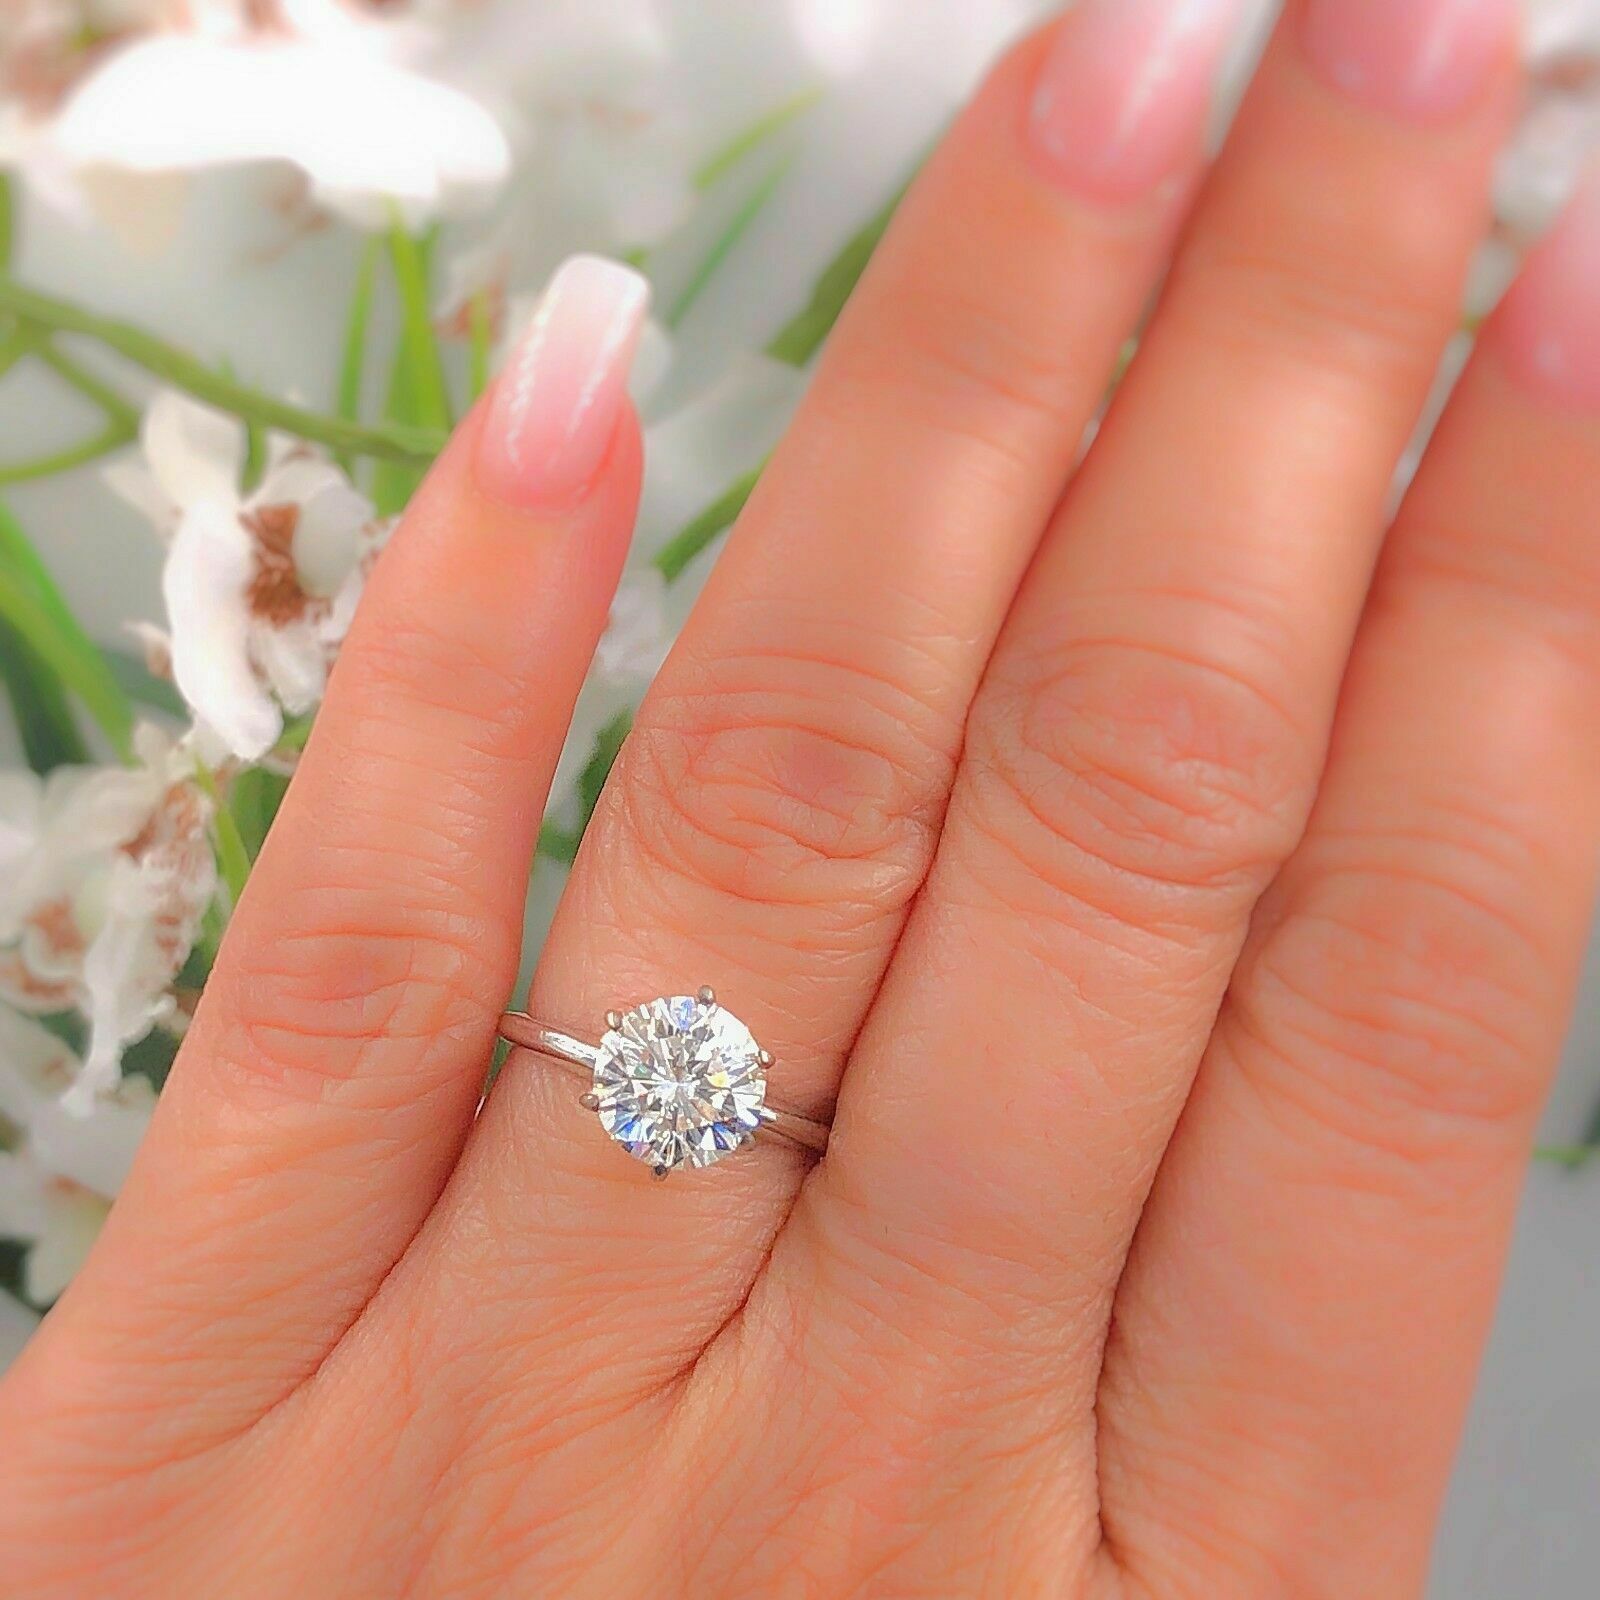 Top 30 Engagement Rings for $30000 - Estate Diamond Jewelry